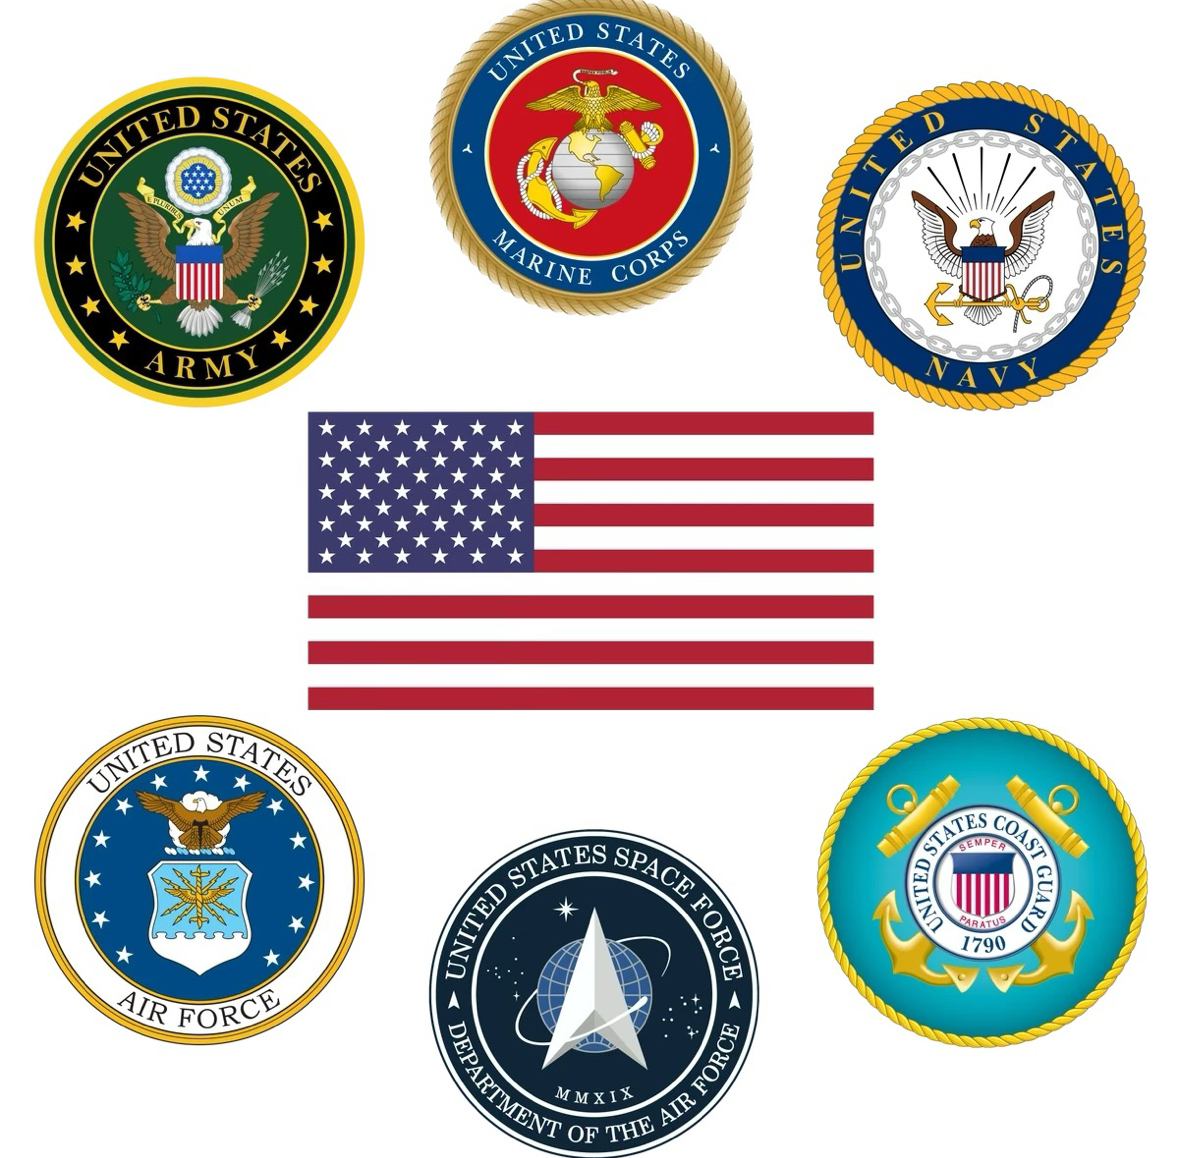 There are many different pathways to choose from after students high school career. One of those paths could be the military. Even then, the military has many different pathways students can go into, including the Marines, Army, Navy, Air Force, Coast Guard, Space Force and more.